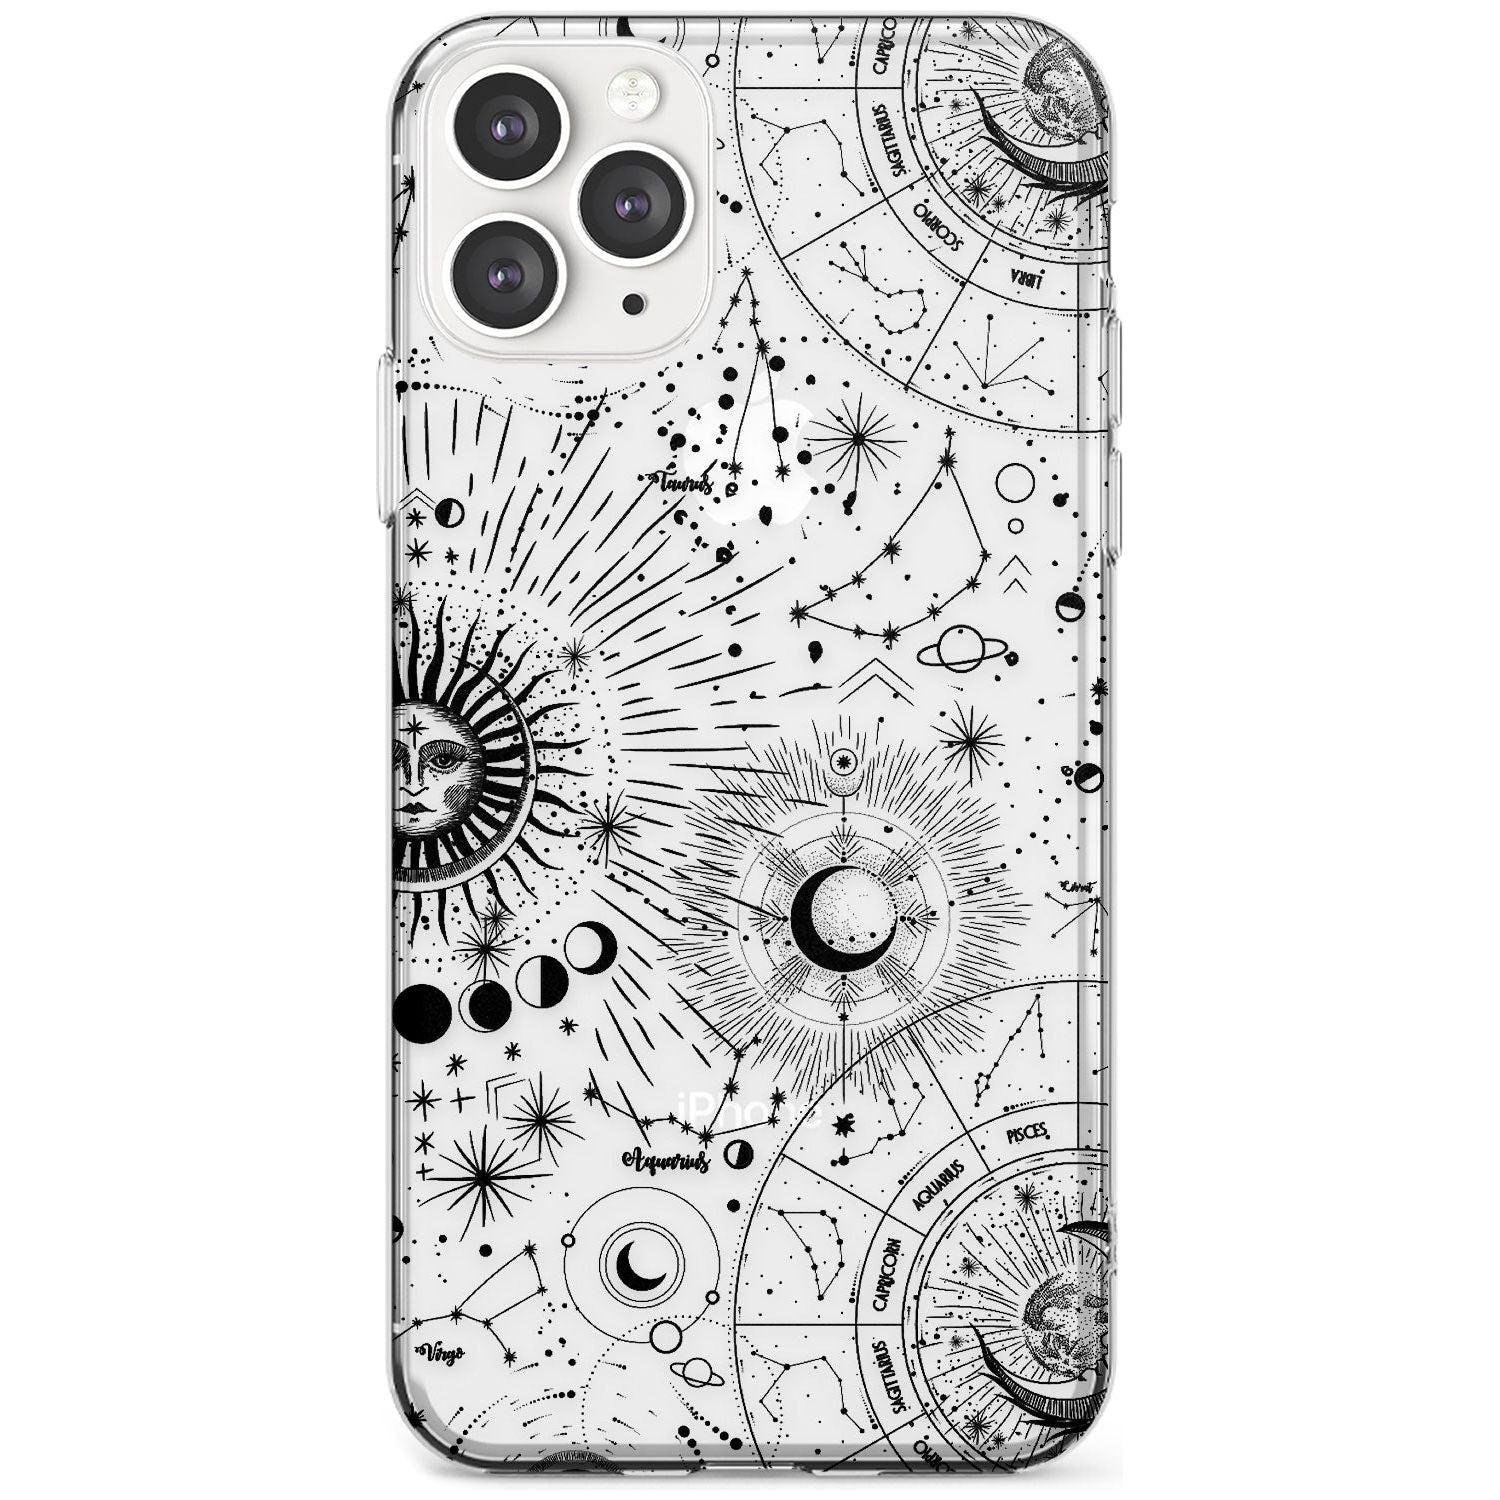 Suns & Constellations Astrological Slim TPU Phone Case for iPhone 11 Pro Max